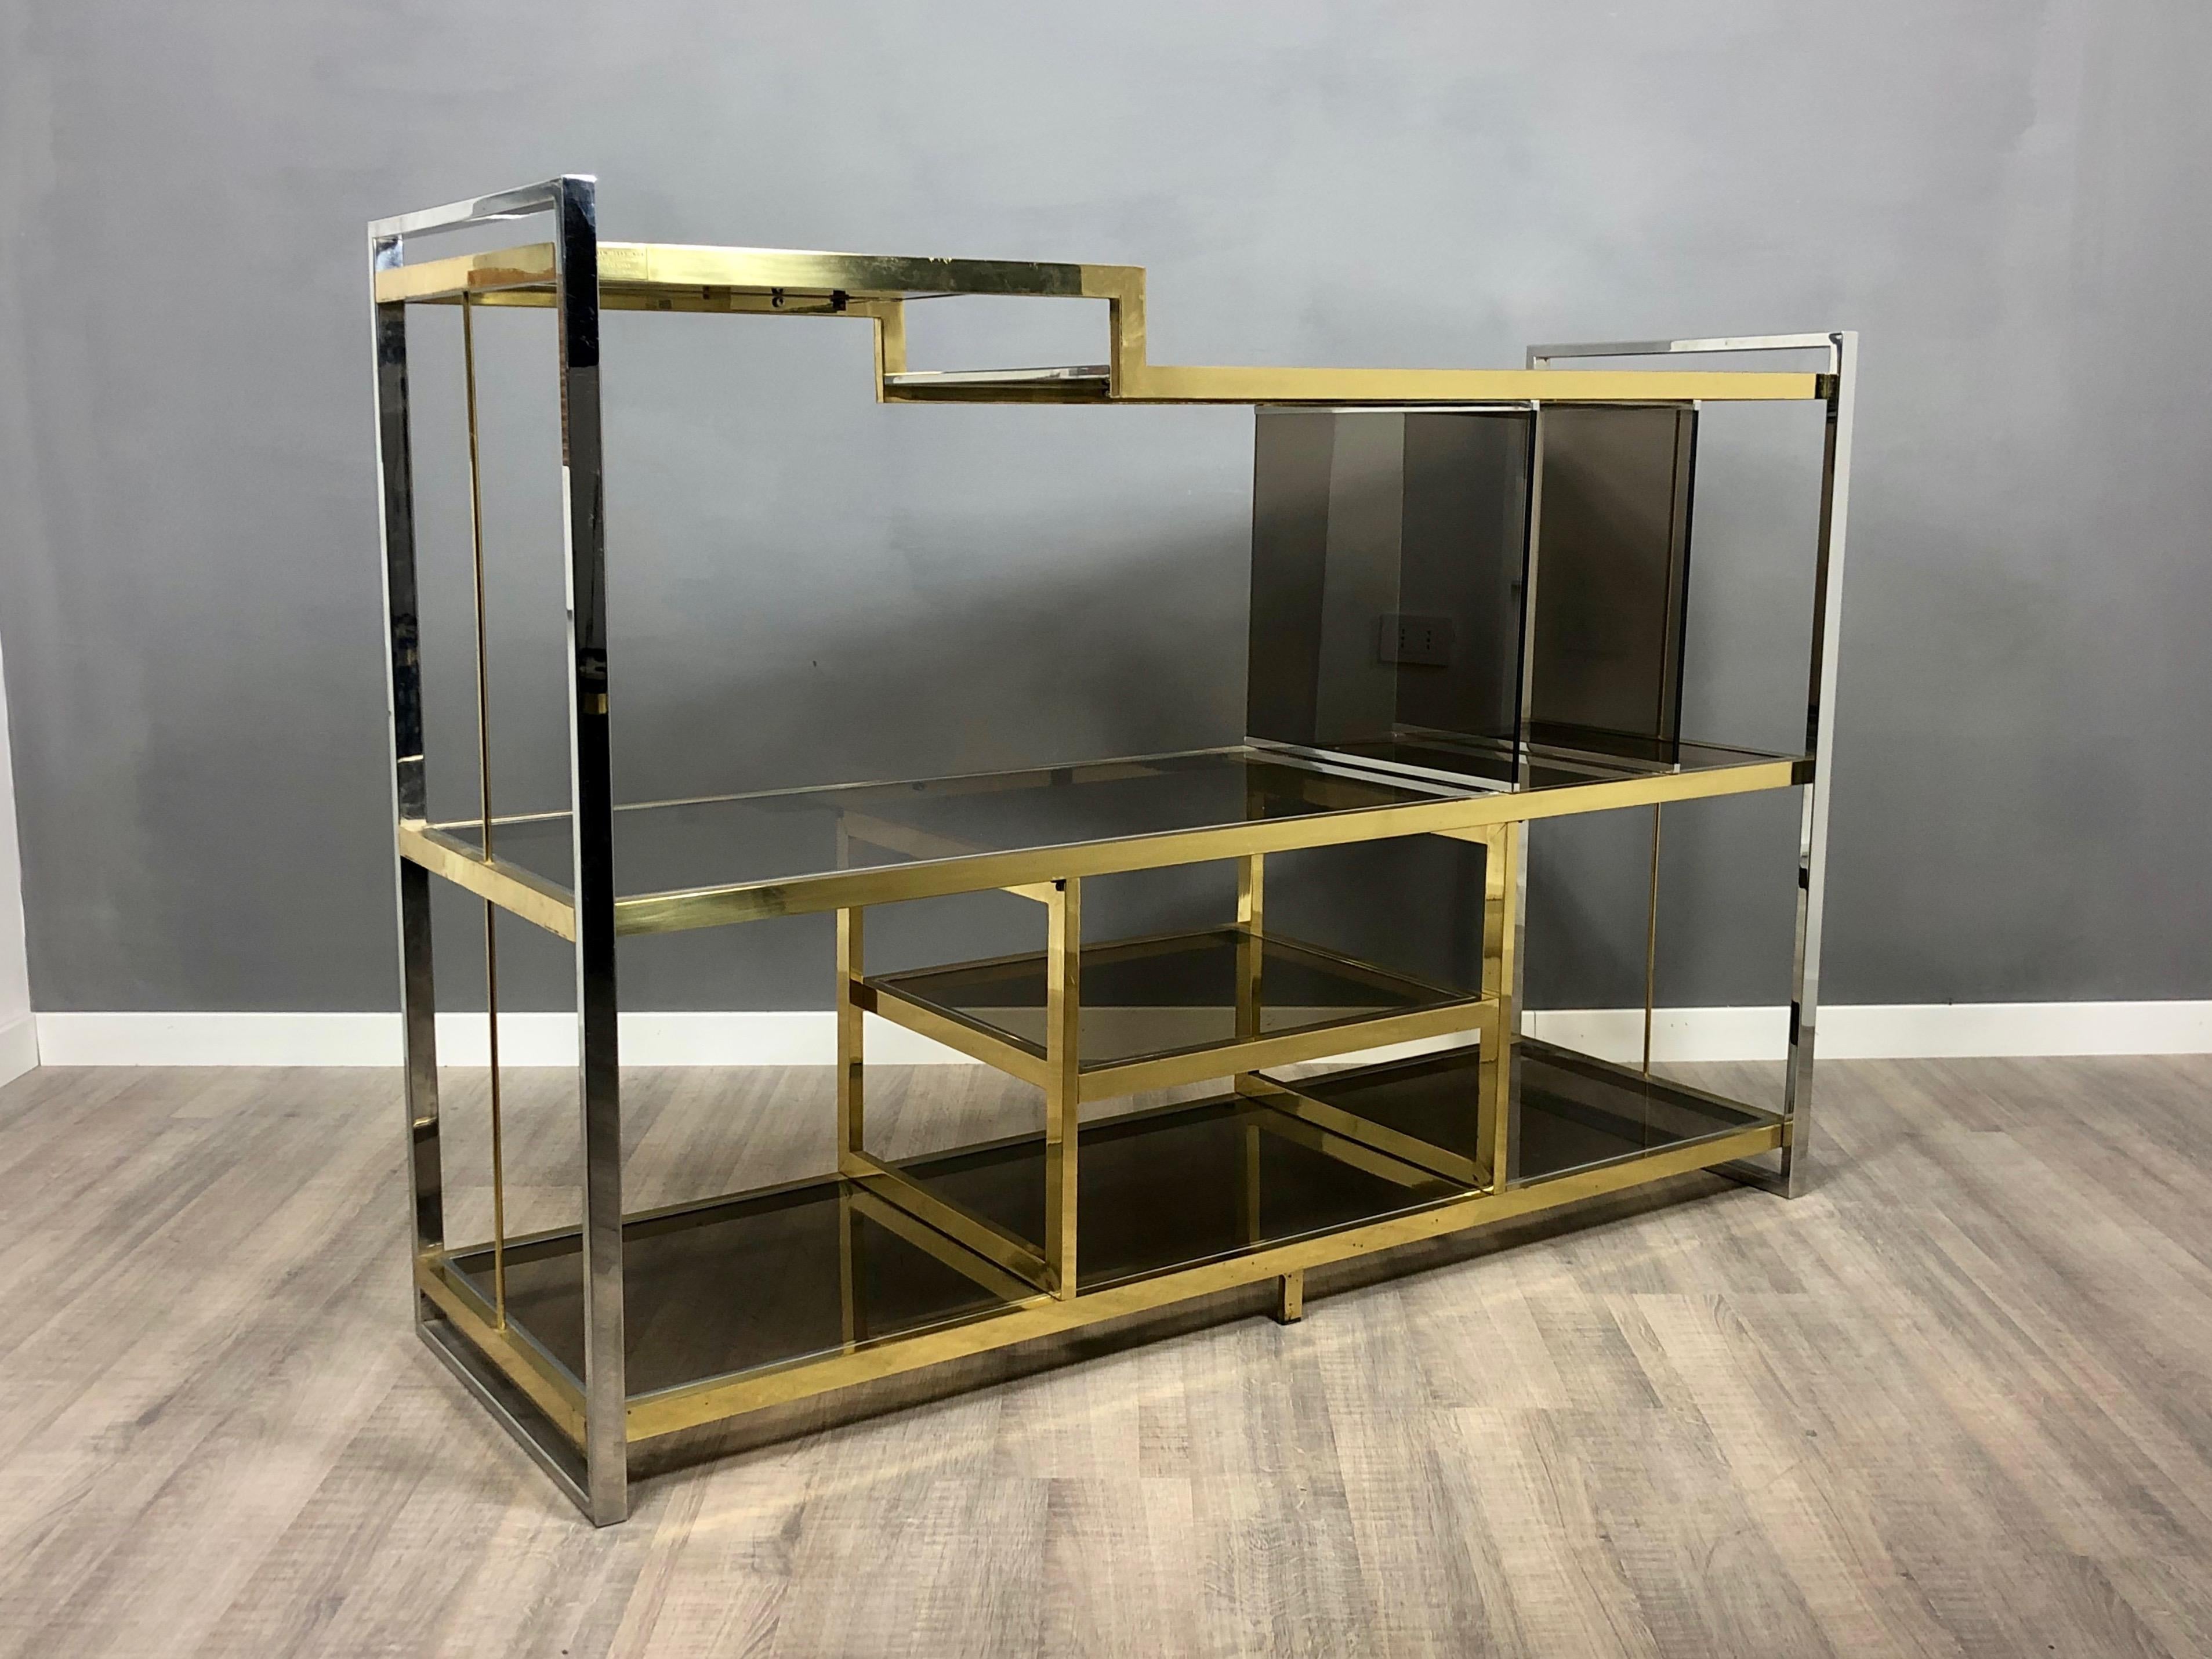 Console/sideboard in brass, chrome and smoked glass. Designed by the Italian Serantoni & Arcangeli for New Ideas Inox, circa 1970s, Italy. 
It has its original target. 
Condition are excellent, light wear due to age and use, as the photos